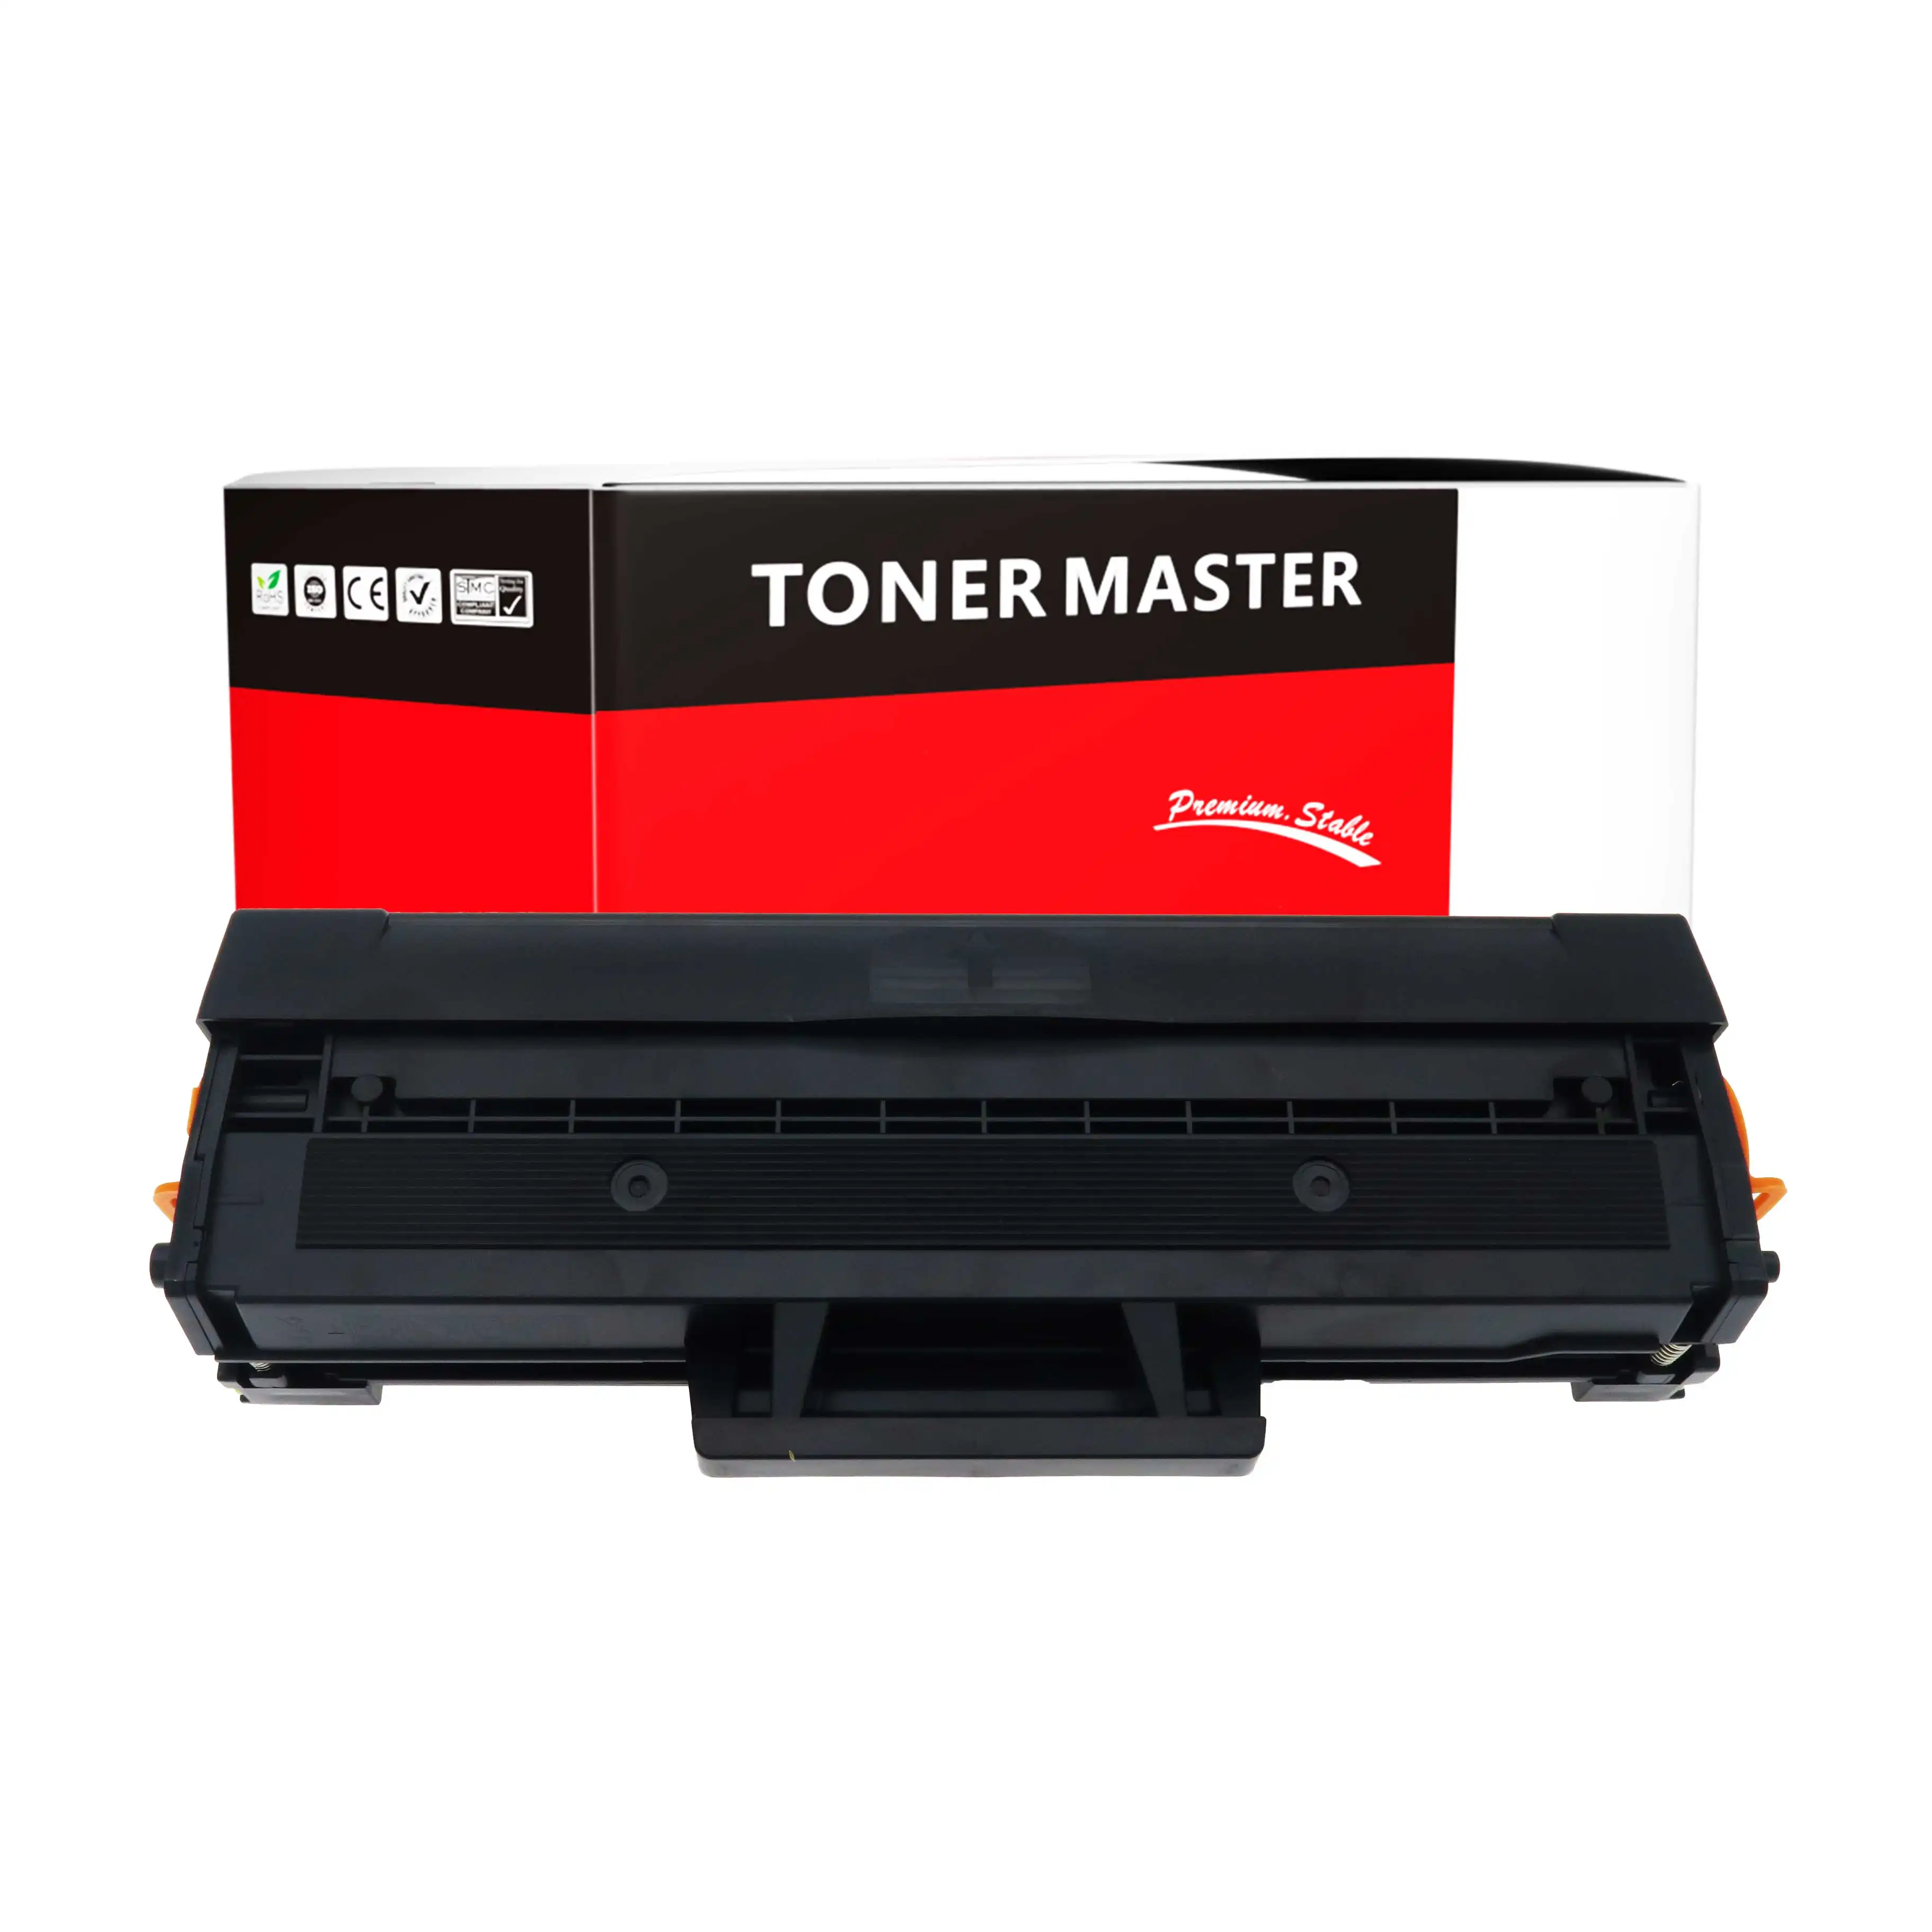 Foshan-tóner Master profesional, producto Mlt-D101S, Compatible con Samsung Mlt D101